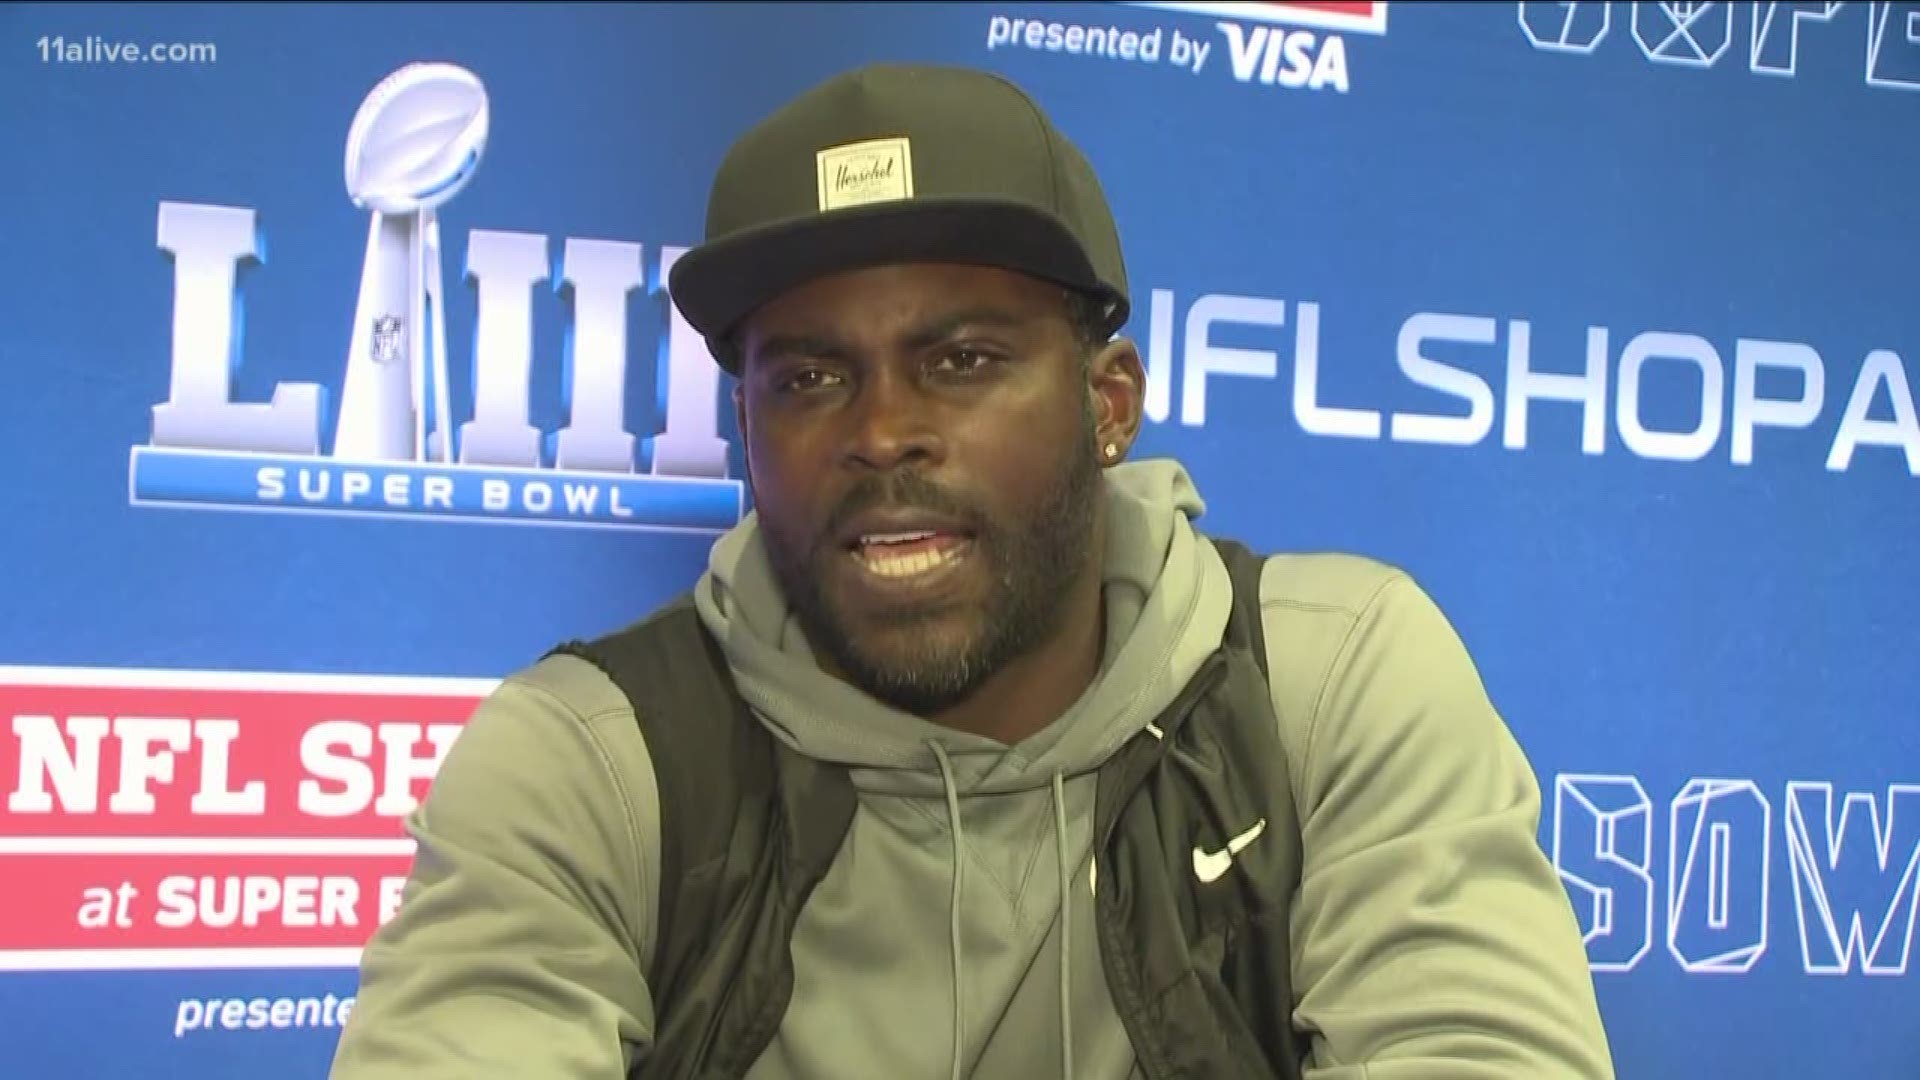 Vick has plenty of experience playing quarterback in big games. So we asked him about the lineup in one of the biggest.